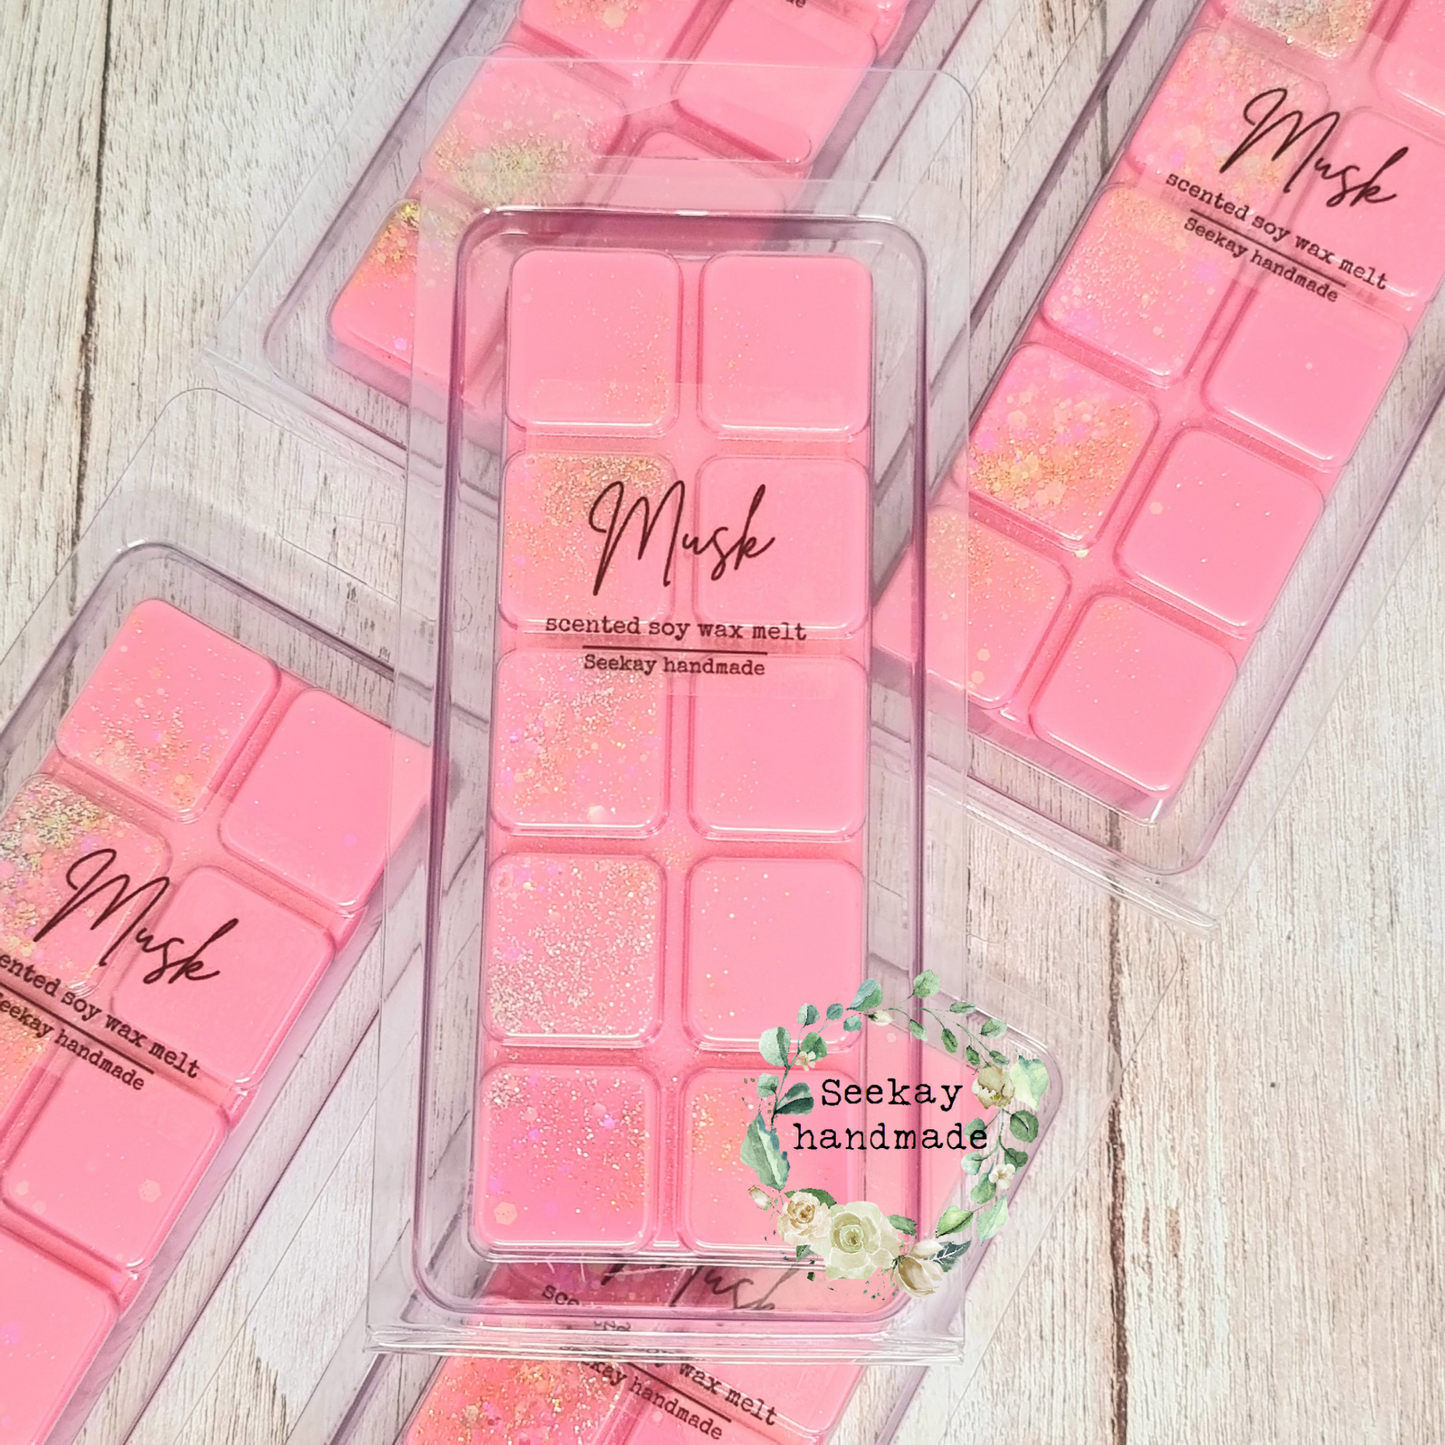 Musk sticks scented soy wax melt